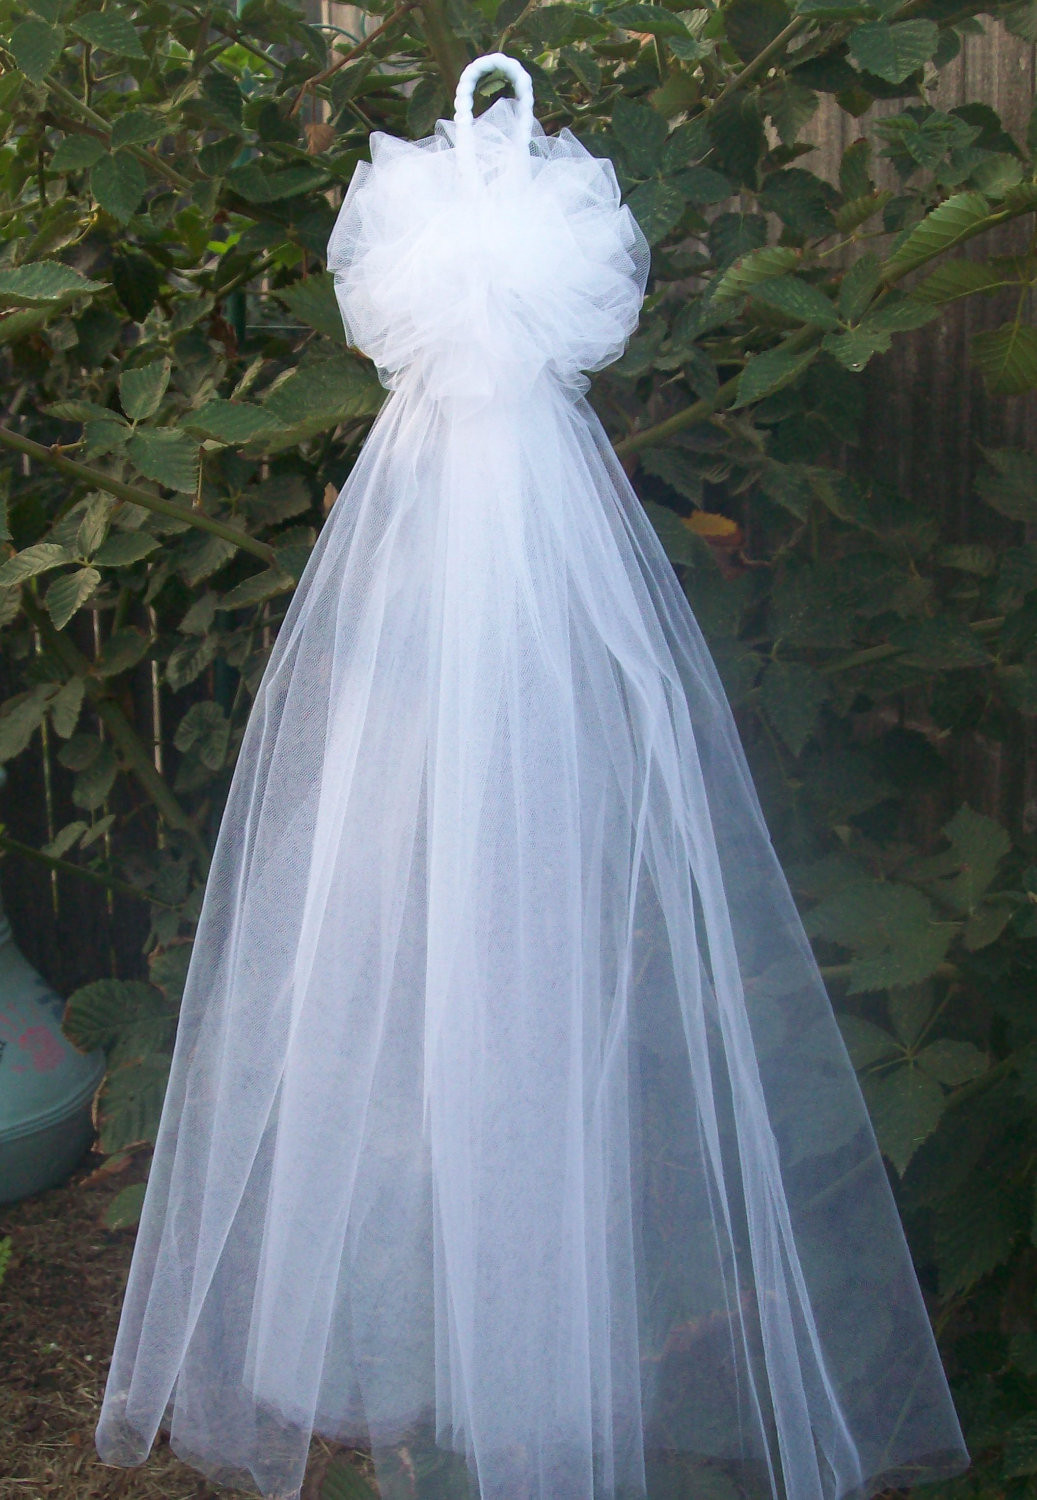 Tulle Wedding Decorations
 Tulle Pew Bows Quinceanera Church Pew Decor White Pew by